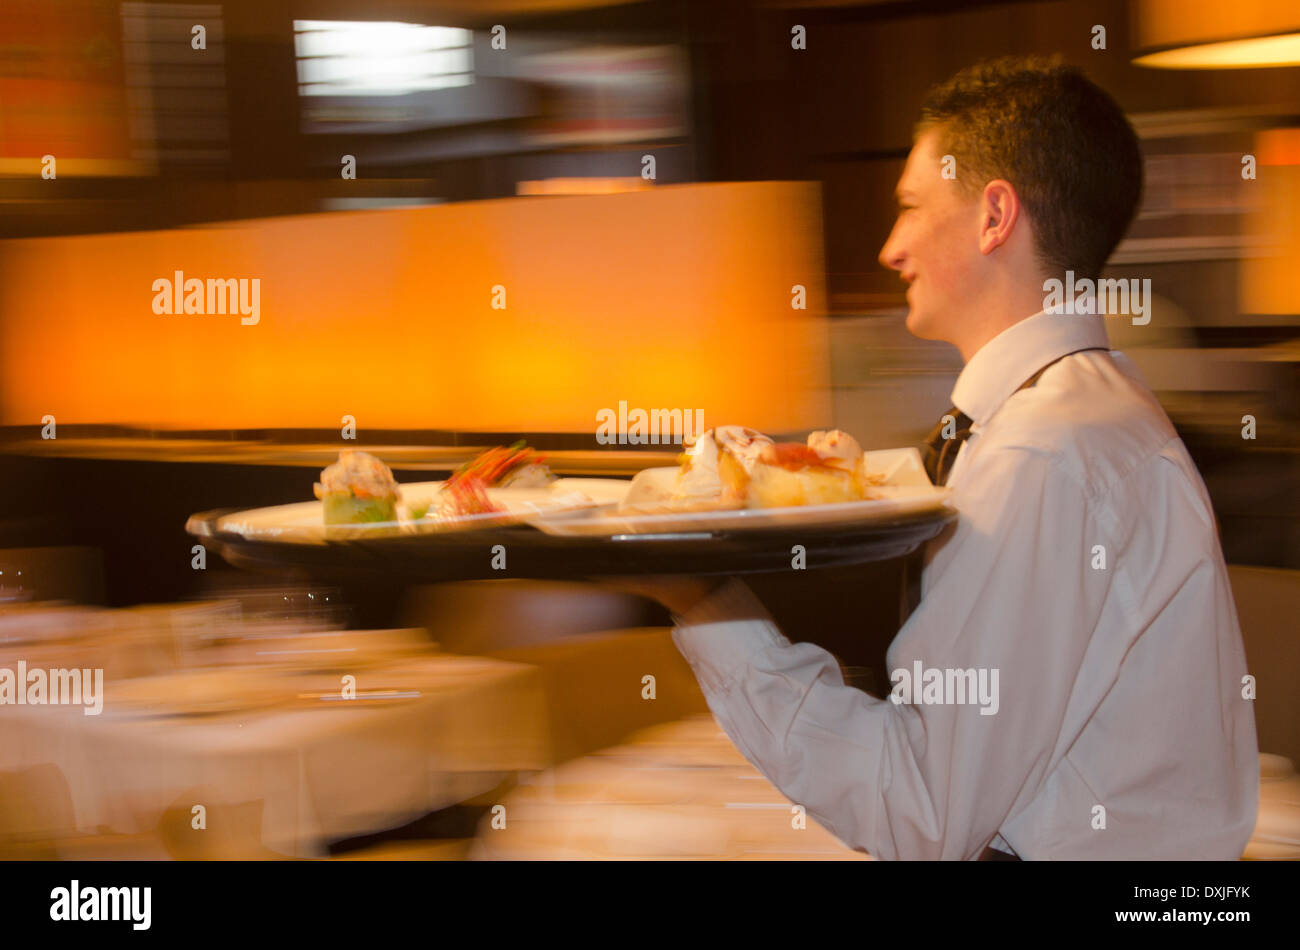 Waiter carrying tray with dishes through resturant Stock Photo